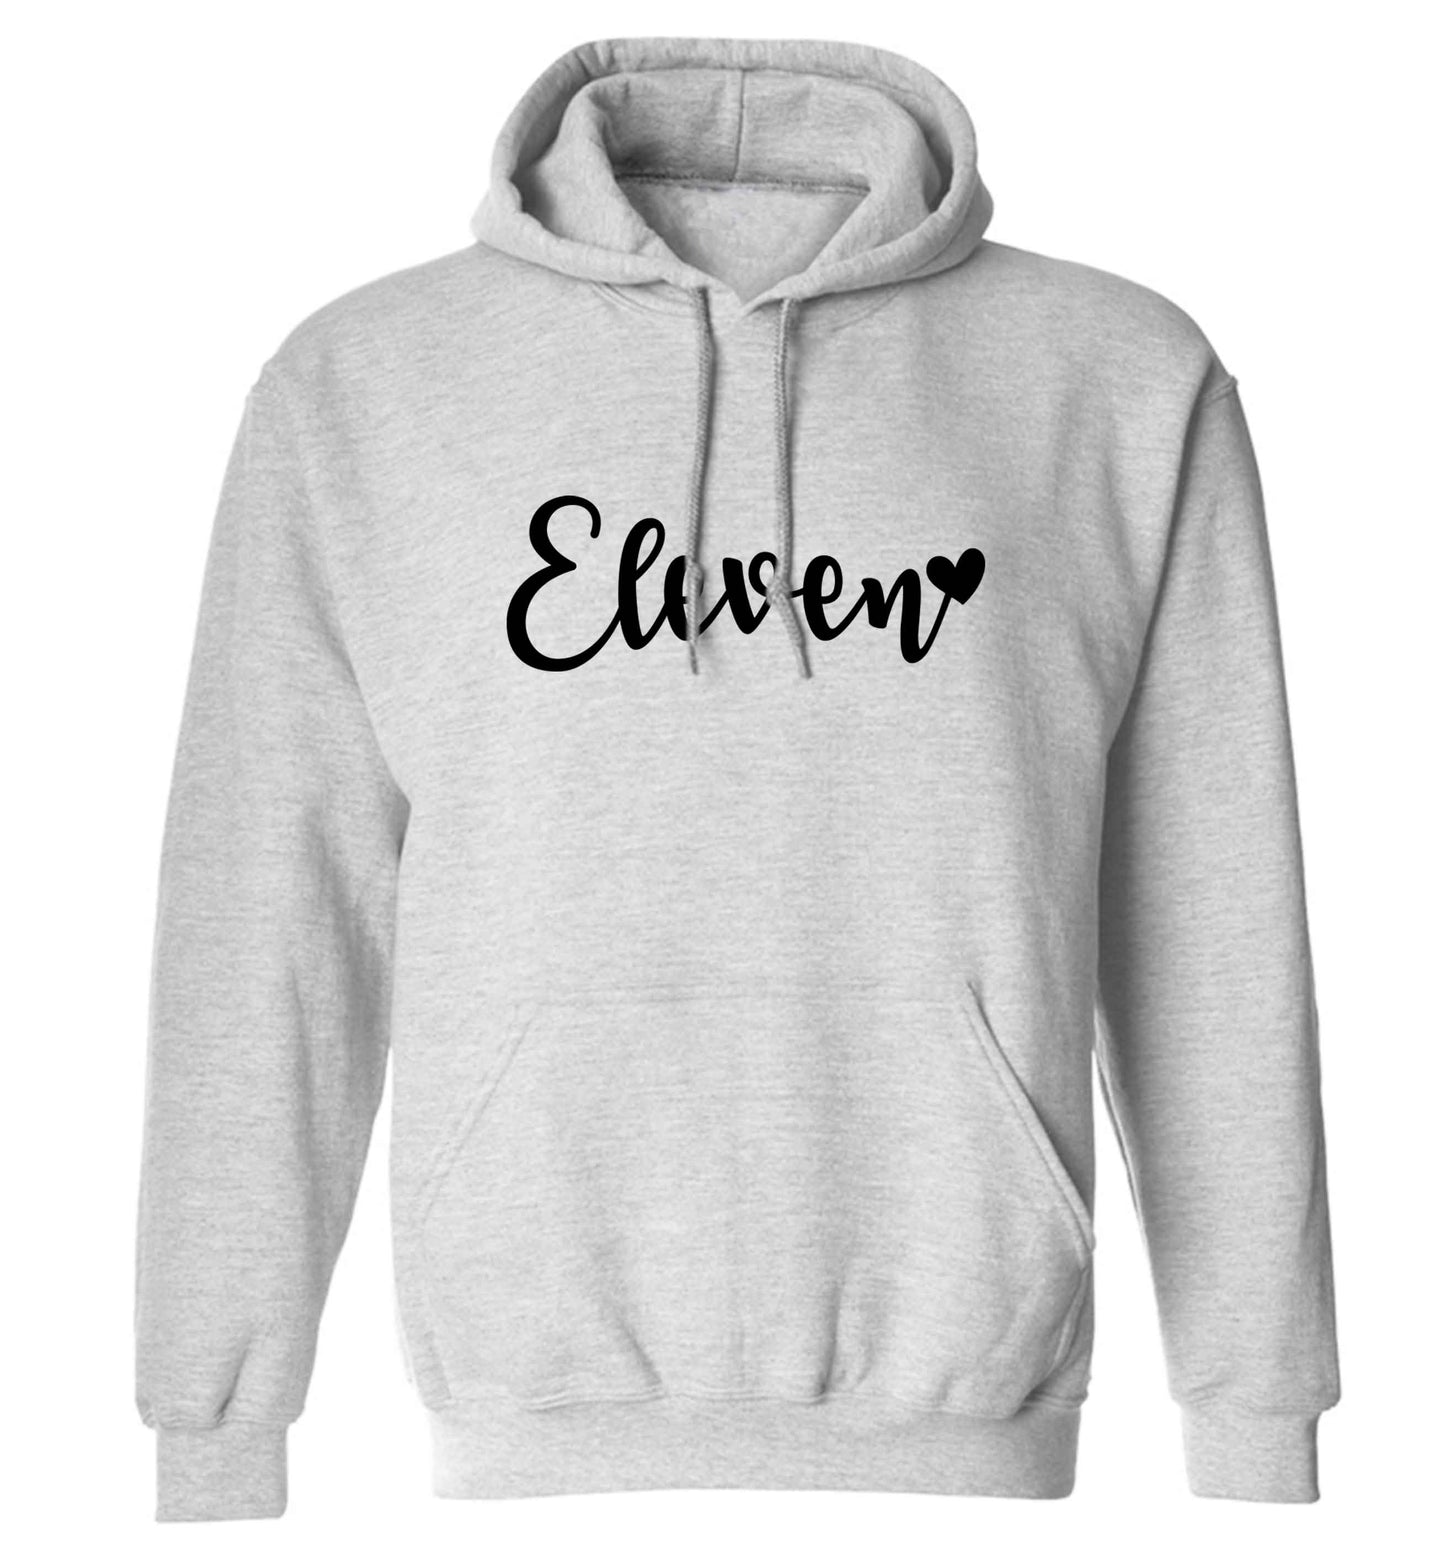 Eleven and heart! adults unisex grey hoodie 2XL